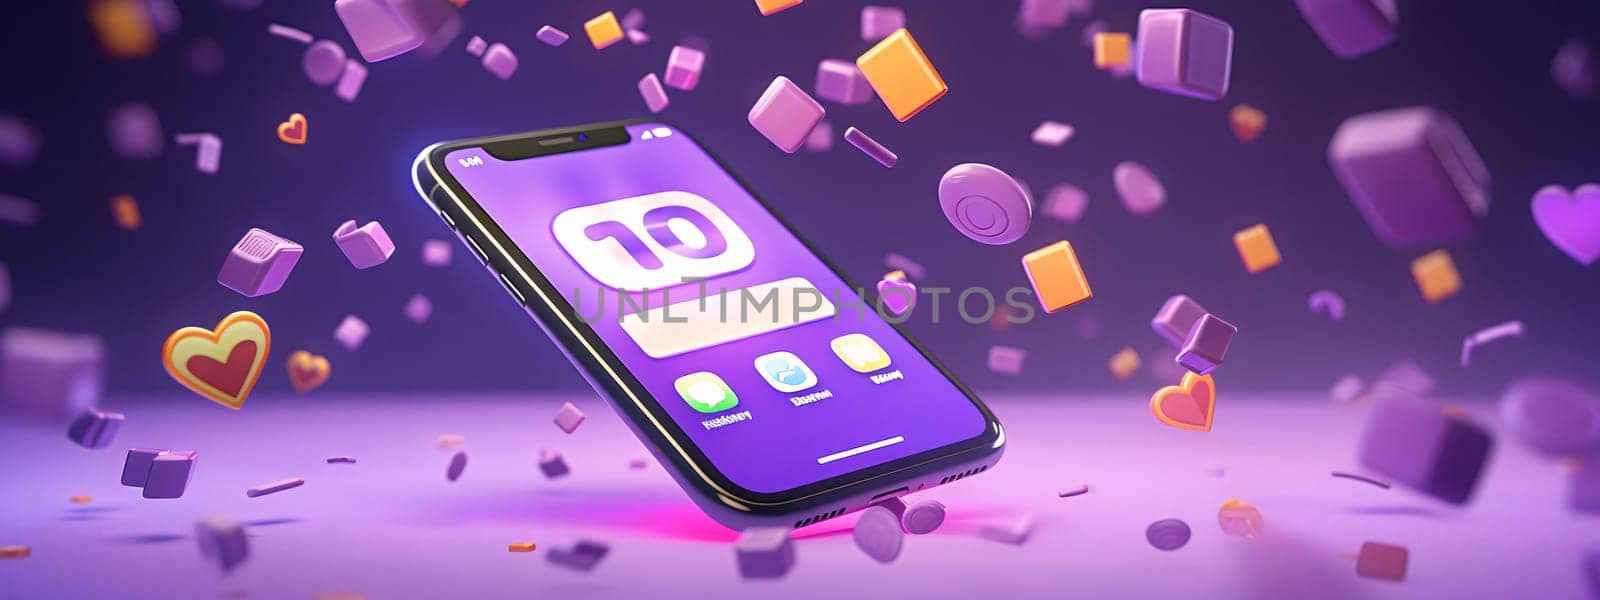 3d render of a smartphone with social media icons on the screen by ThemesS